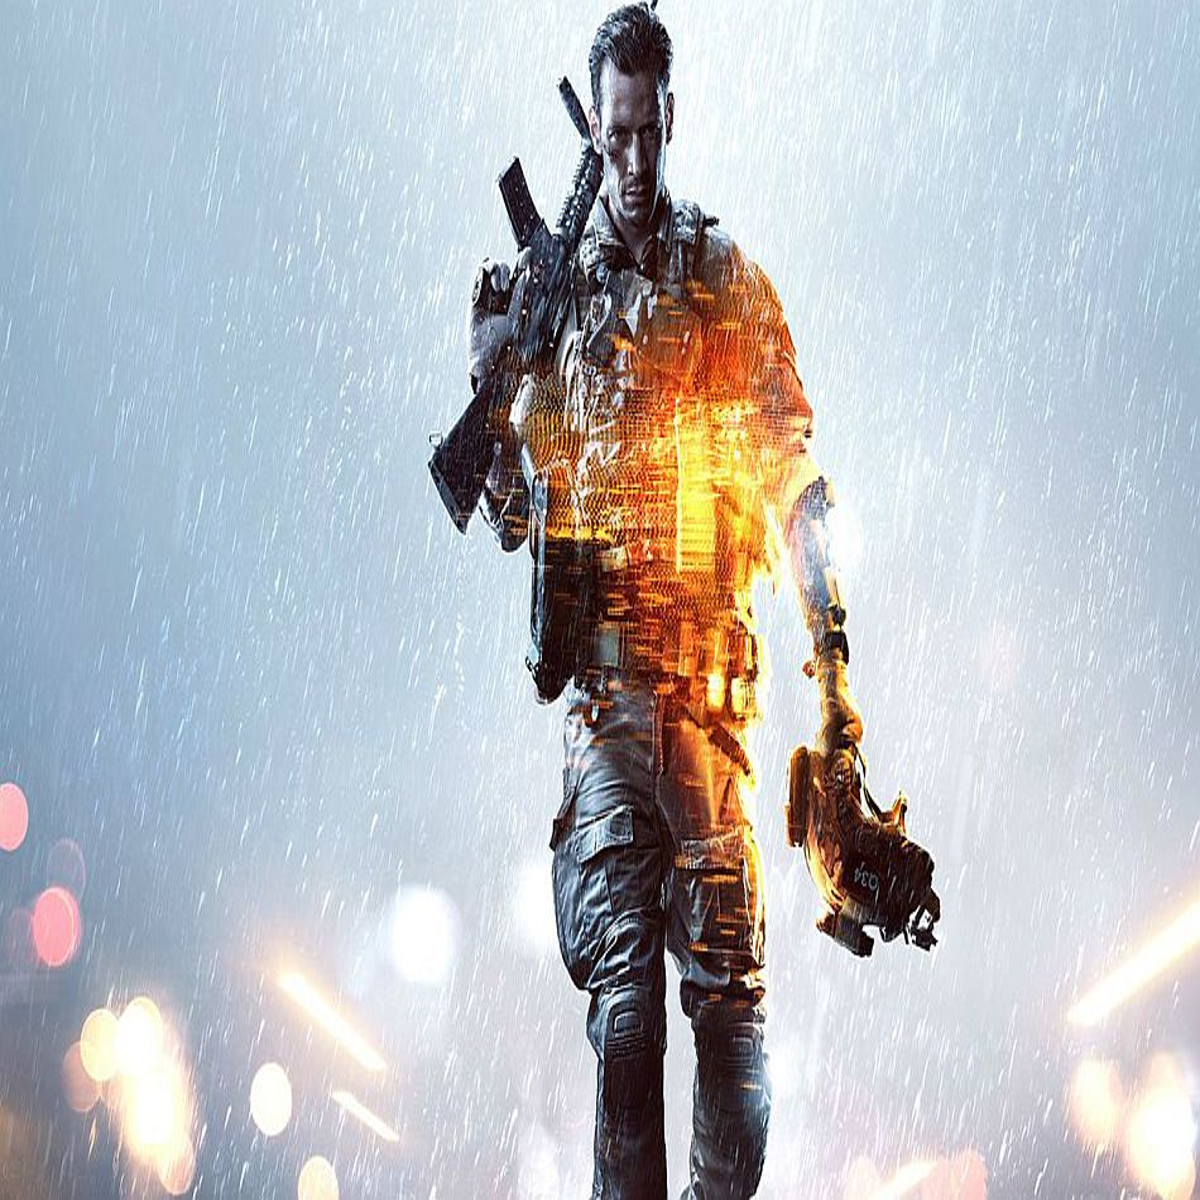 Download Battlefield 4's Final Stand DLC for free this